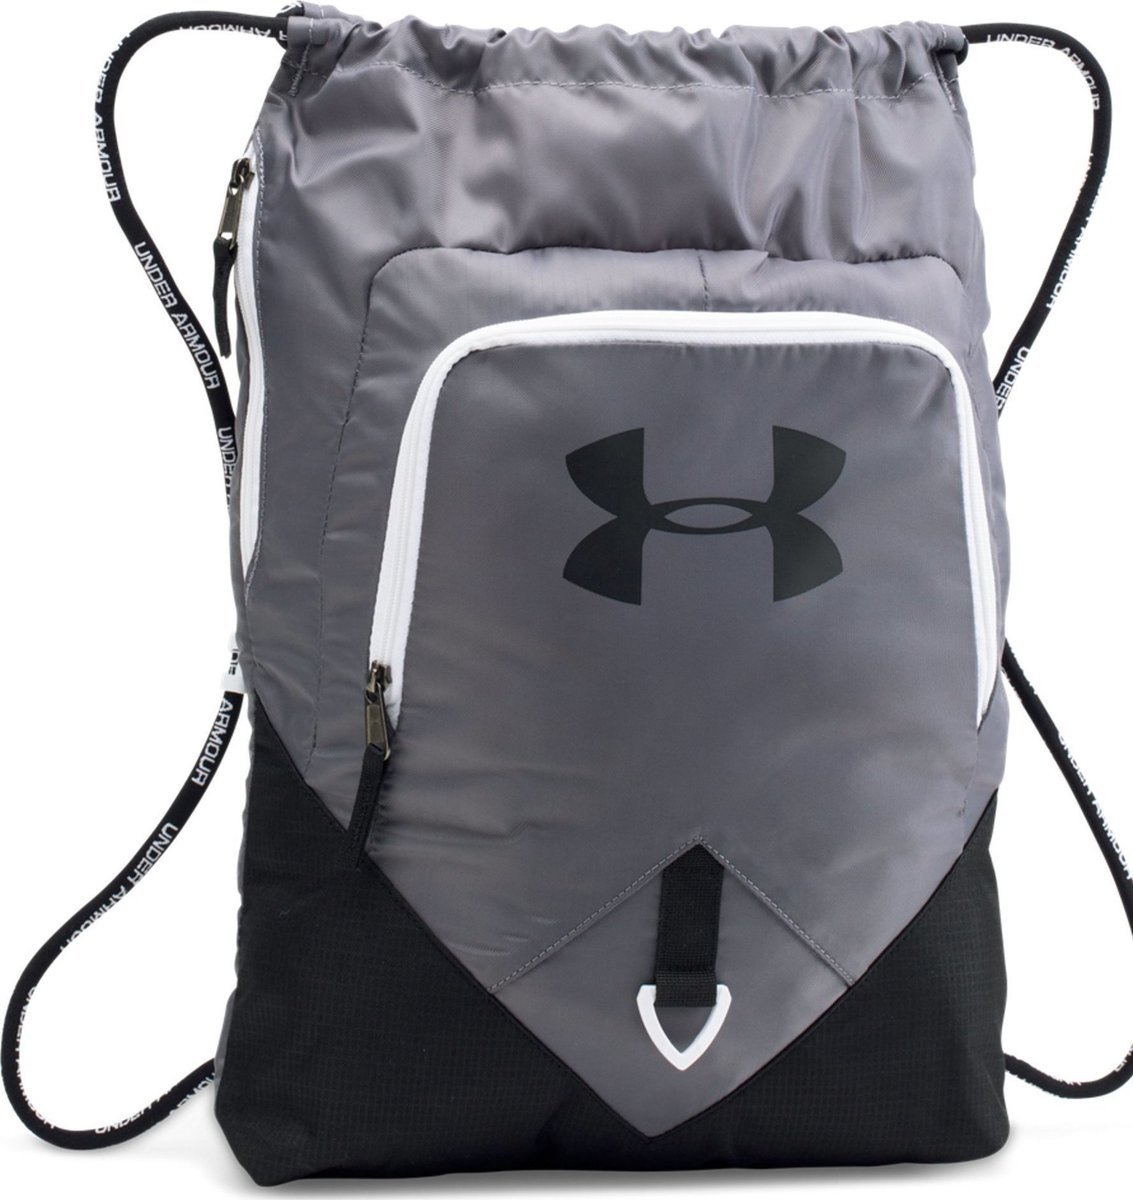 Sportbeutel Under Armour Undeniable Sackpack